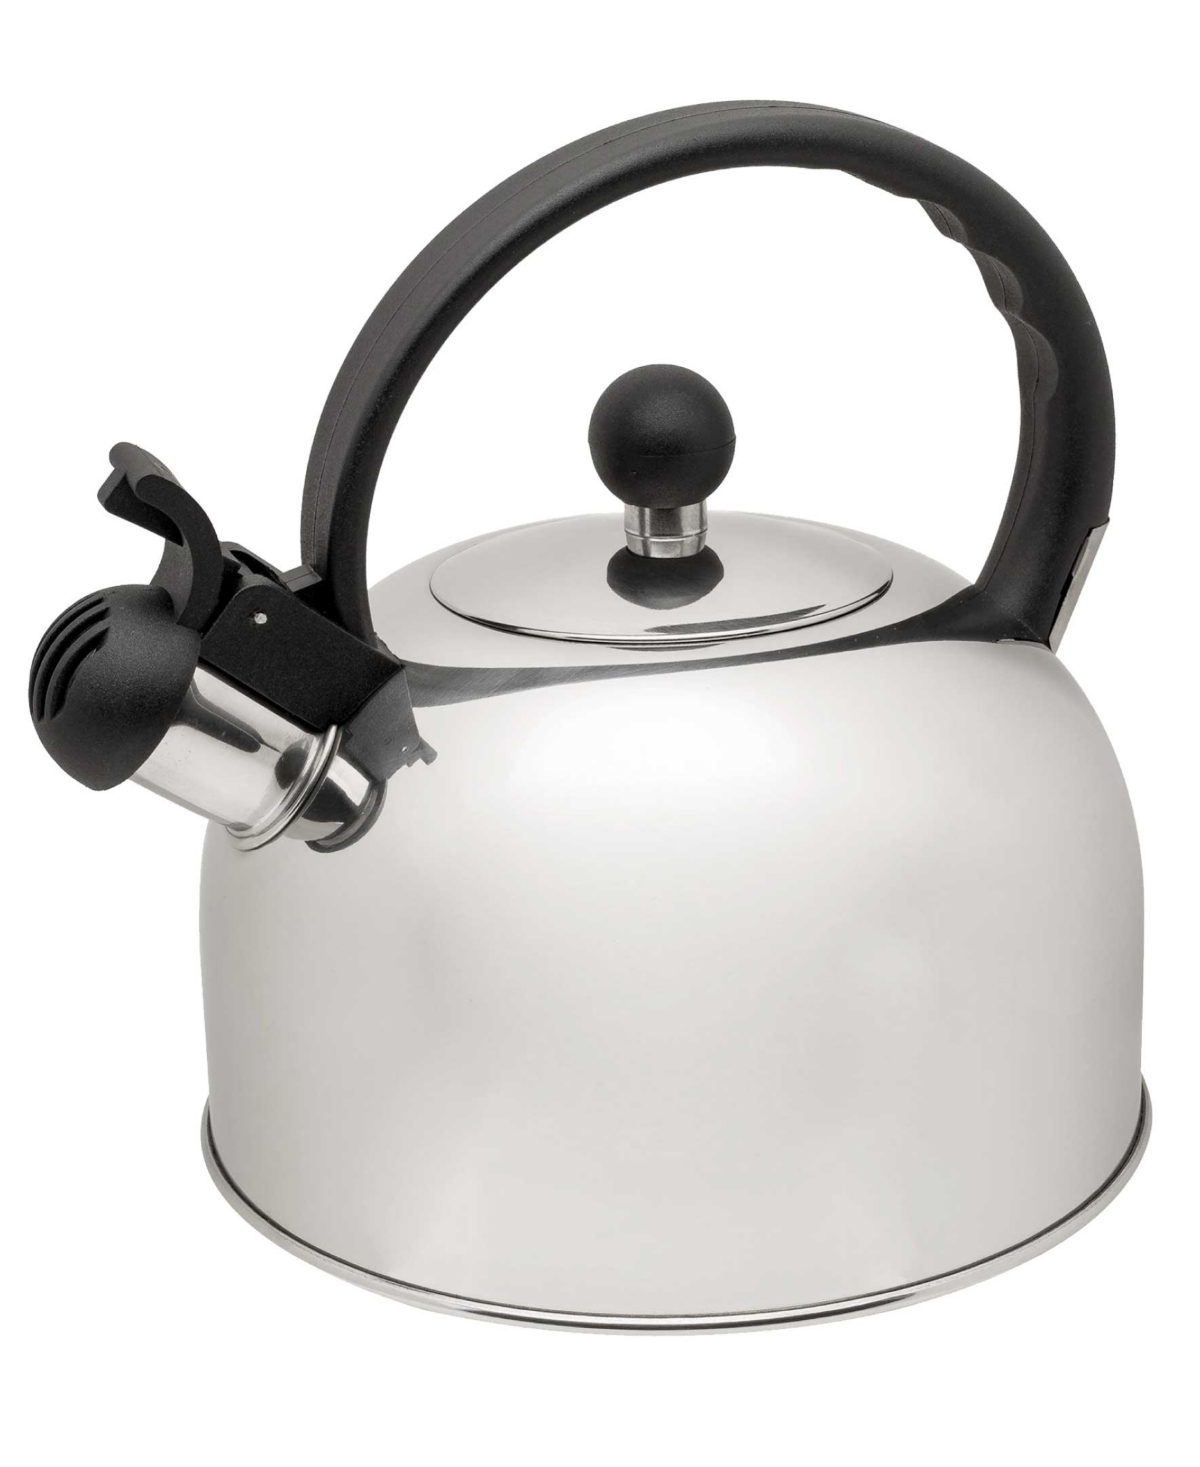 Primula Stainless Steel 2 Quart Today Simon Whistling Kettle In Silver